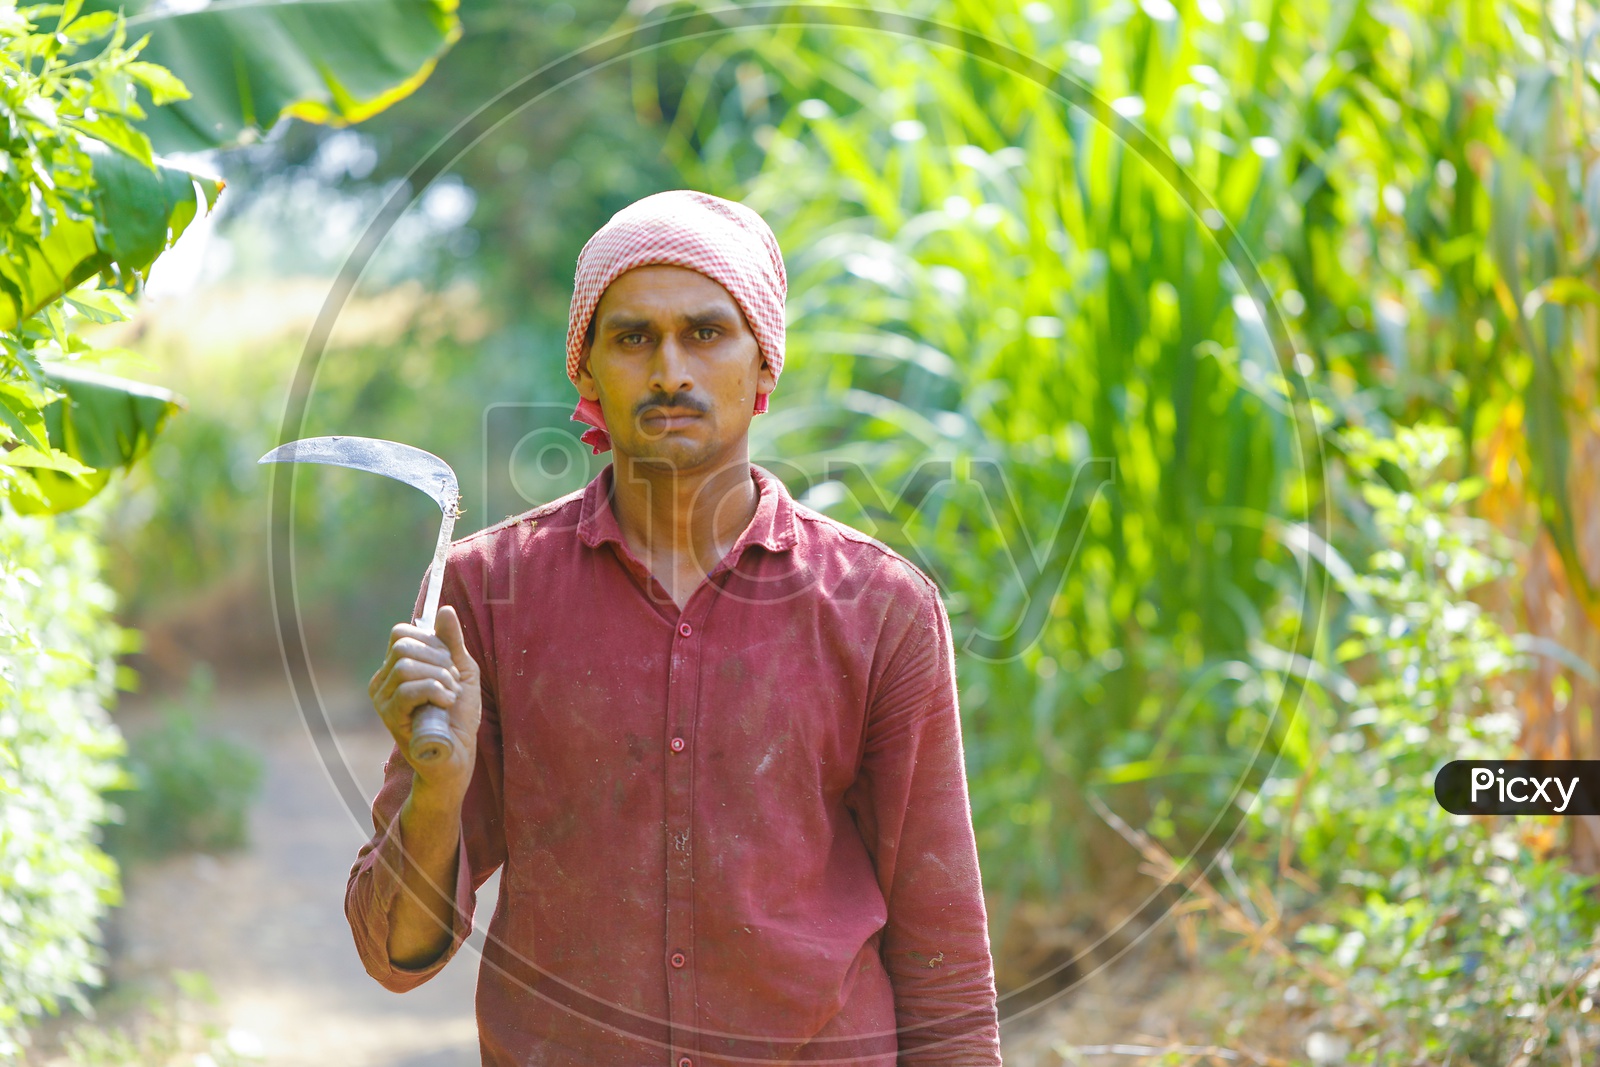 Banana Farmer With Hand Sickle or Tool in Hand Over A Green Field Background